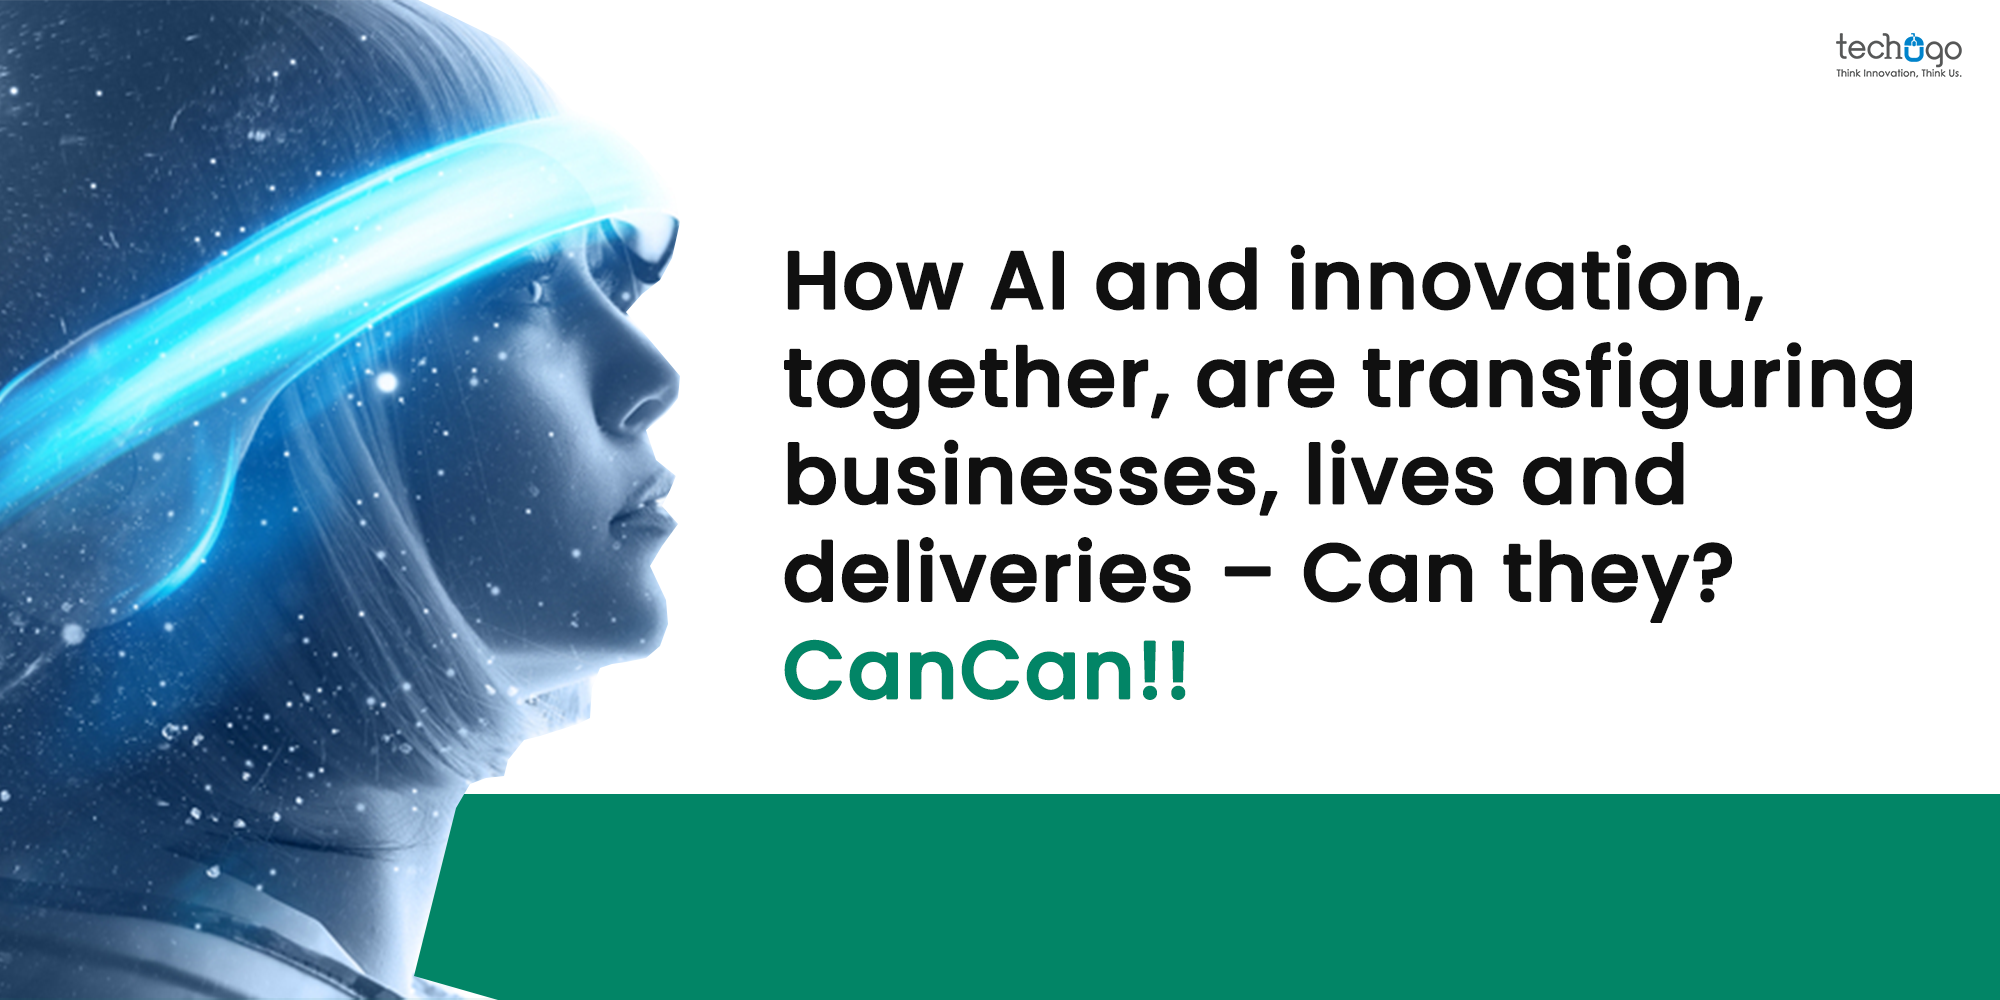 How AI and innovation, together, are transfiguring businesses, lives and deliveries – Can they? CanCan